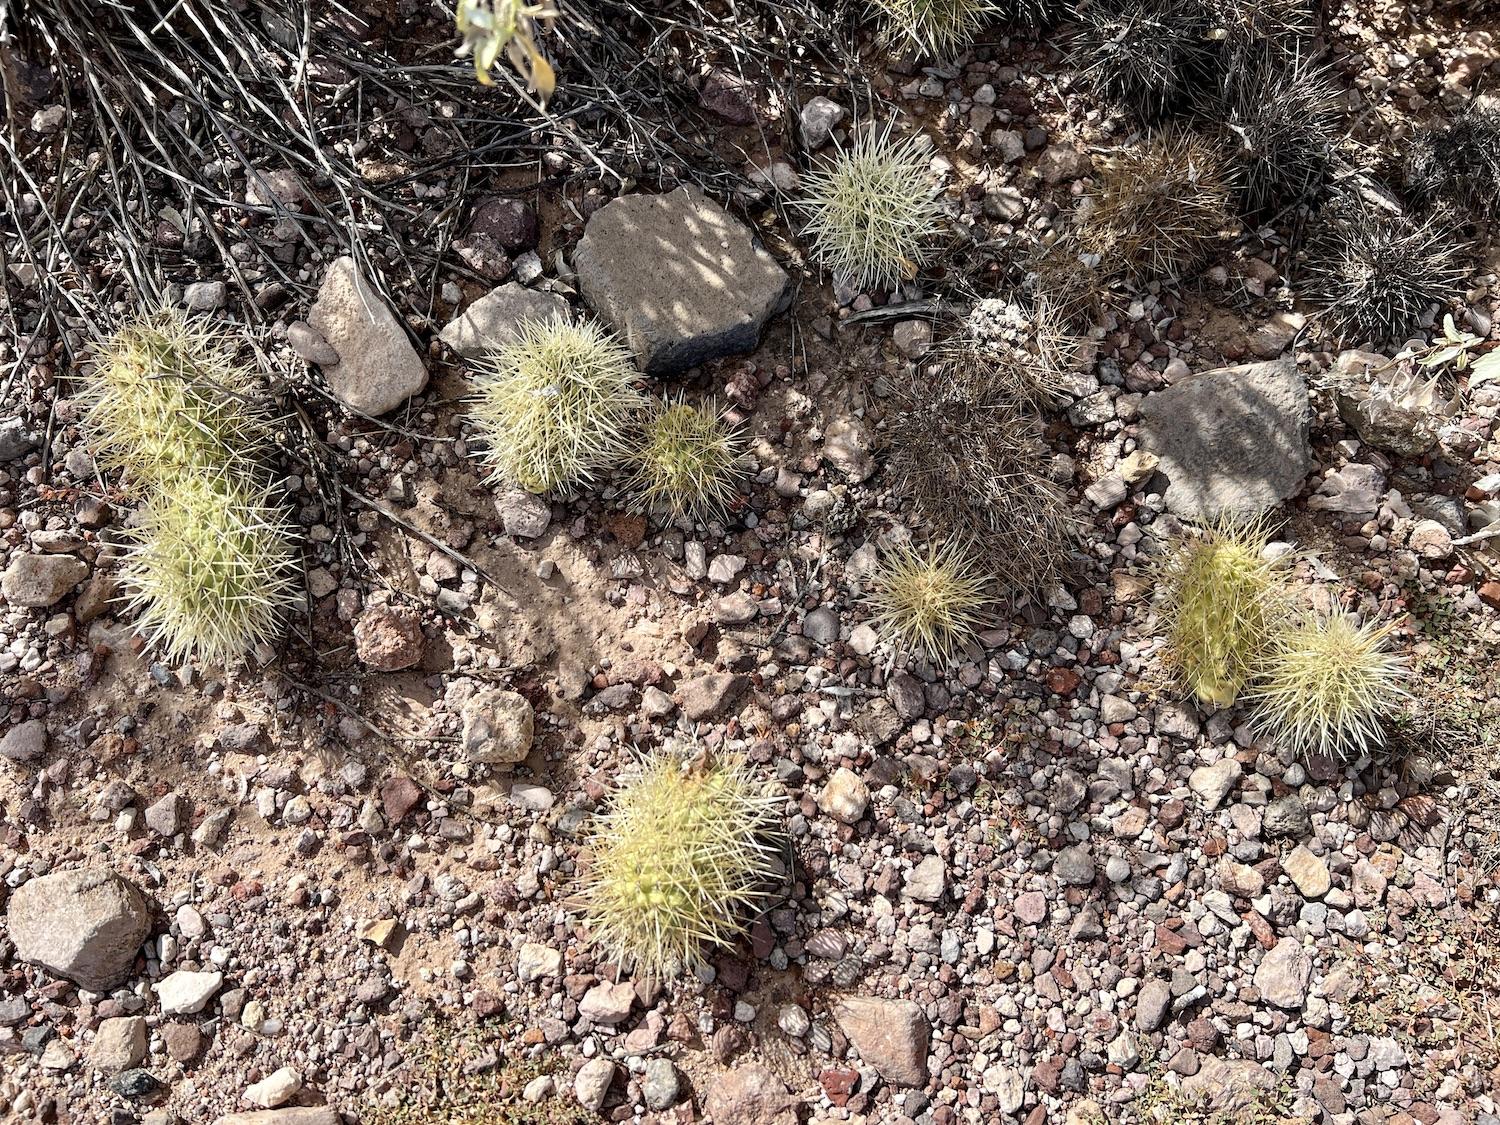 Avoid stepping on these cacti balls unless you want to &quot;get cholla'ed.&quot;